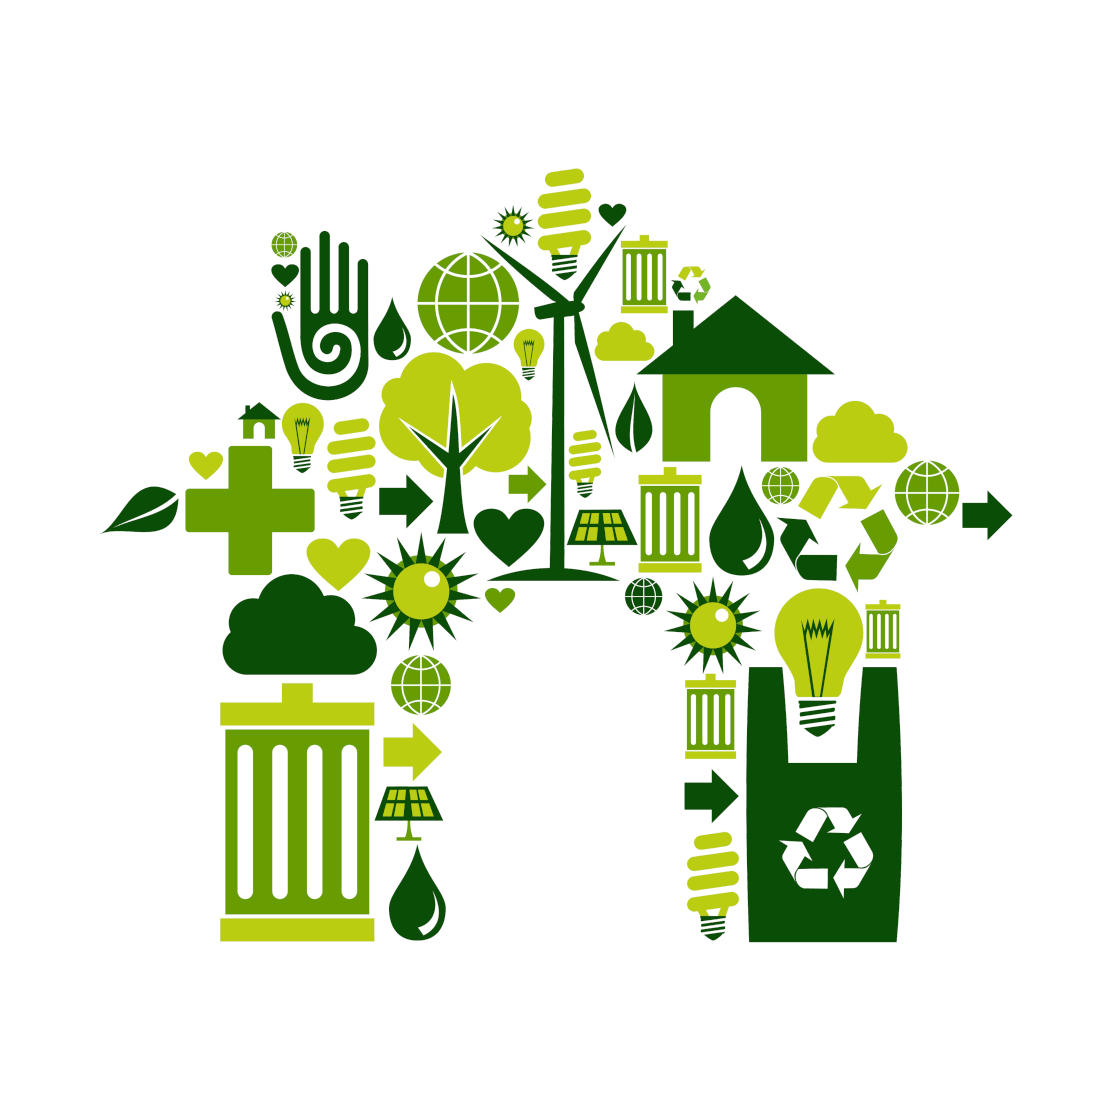 collage of various green environmental icons in the shape of a house